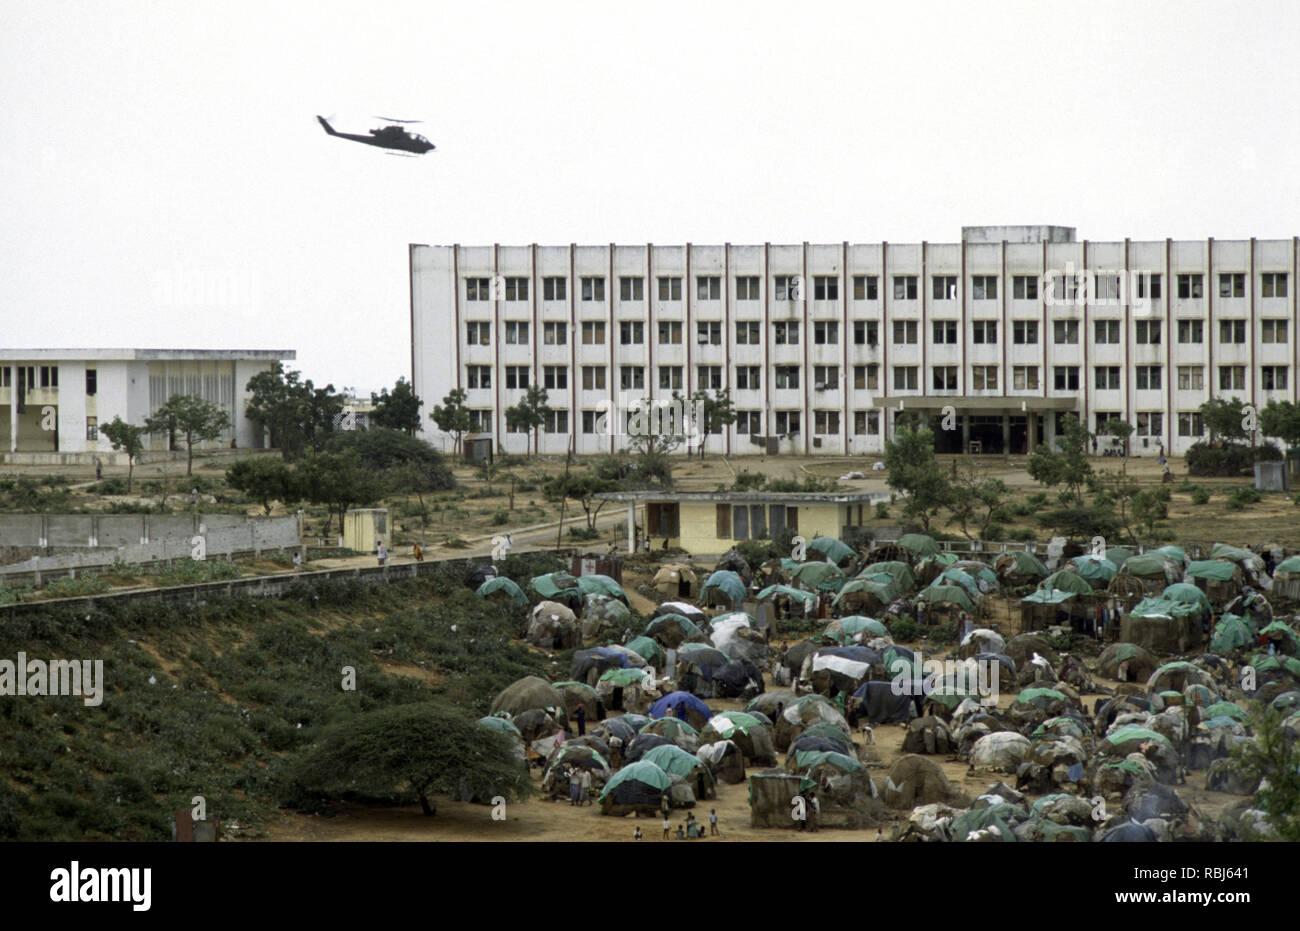 10th October 1993 A U.S. Army Bell AH-1 Cobra attack helicopter patrols low above a tented refugee camp in front of the Polytechnic Institute in Mogadishu, Somalia. Stock Photo